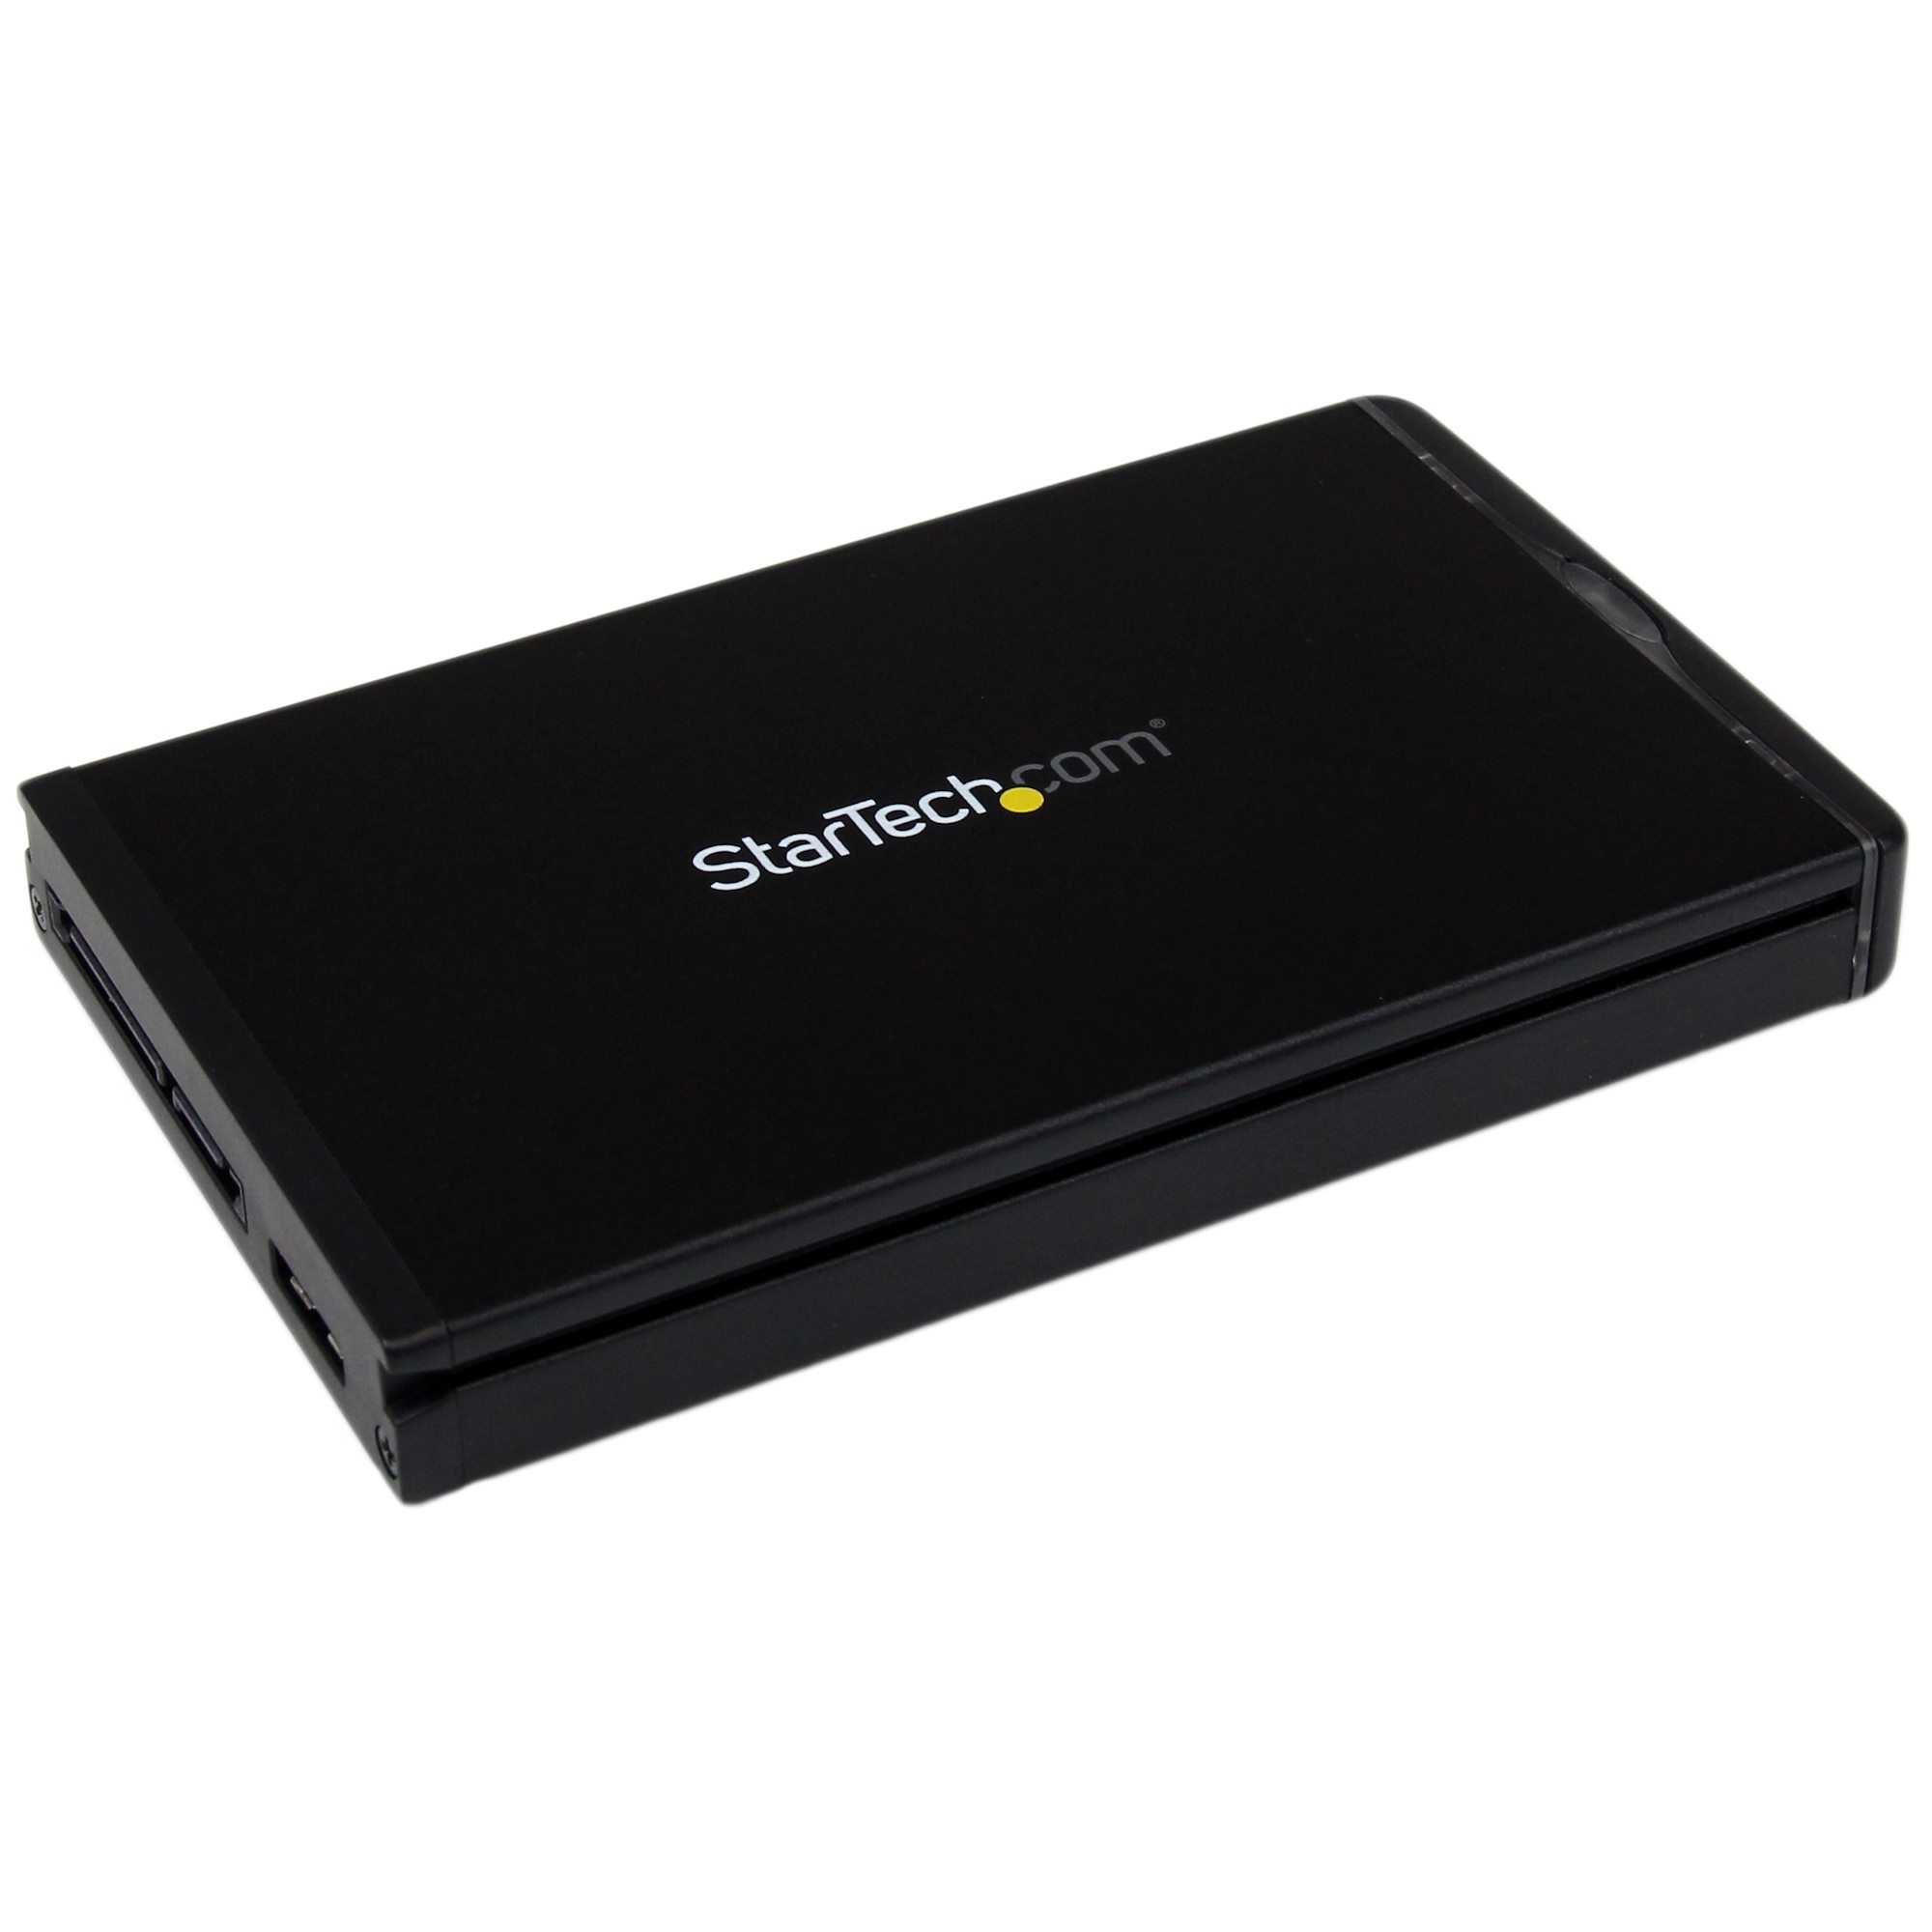 HDD/SSD External Box 2.5 SATA USB3.1 SuperSpeed Black - Hard Drive  Enclosures - Hard Drive and Memories - PC and Mobile